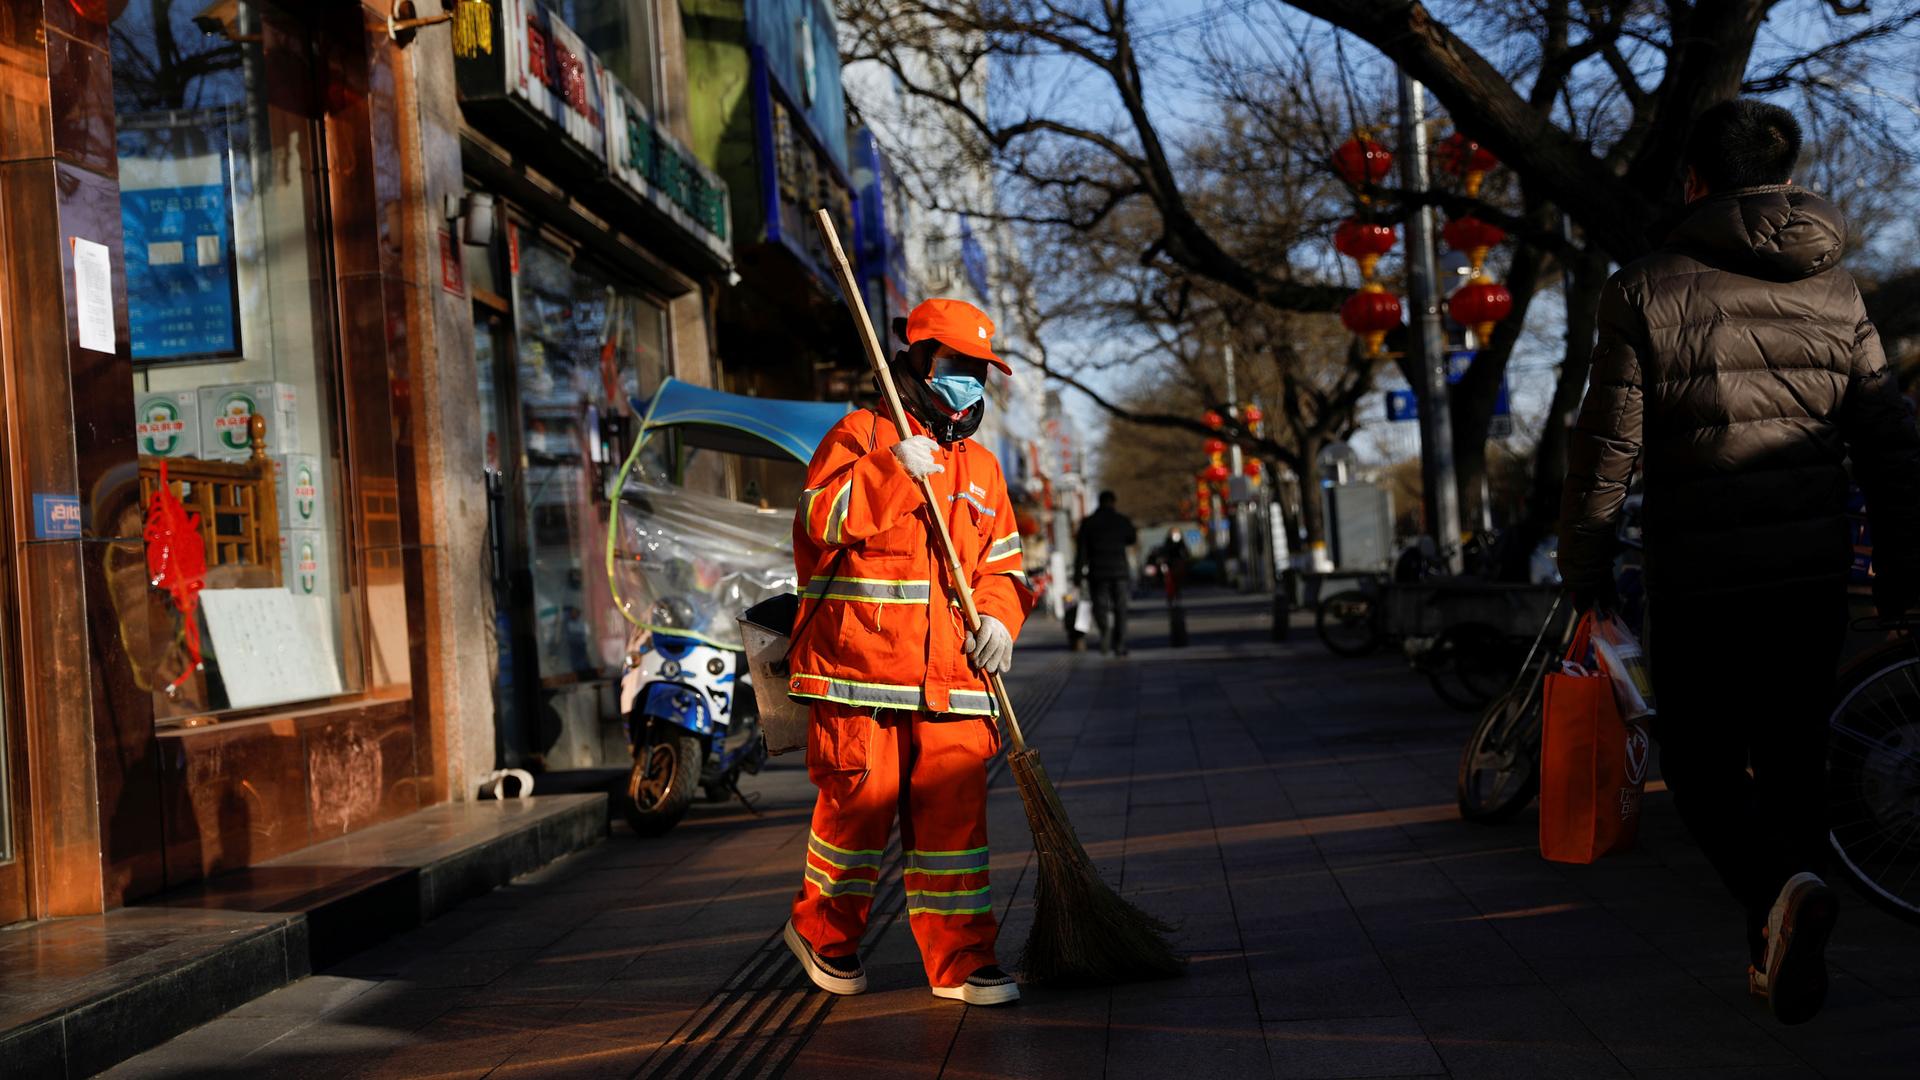 A street cleaner is shown wearing an orange, reflective safety suit and a face mask walks on a sidewalk.